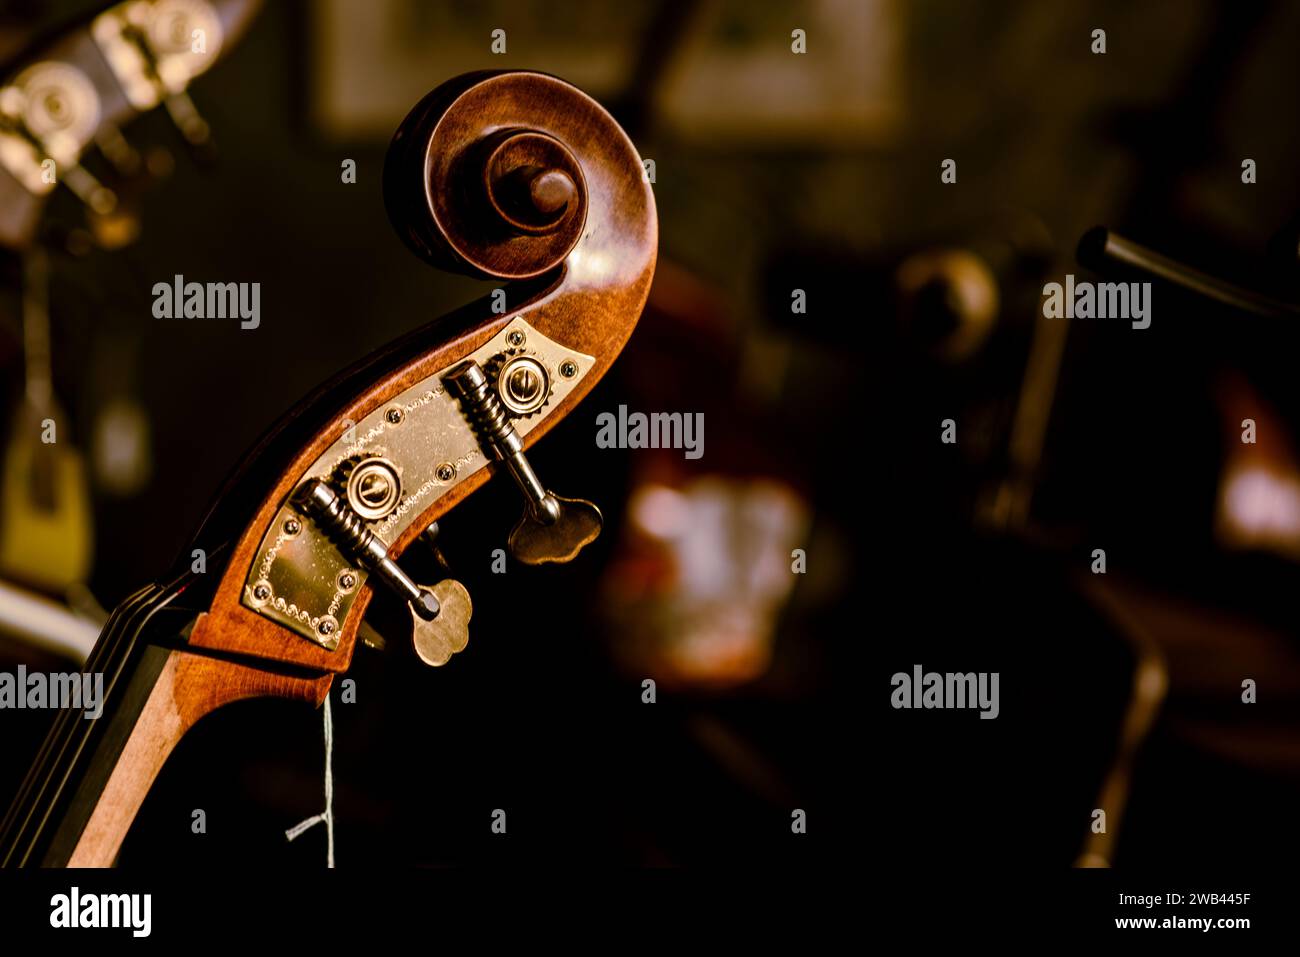 A close-up shot of an antique wooden violin, placed among several vintage guitars in a bright and airy music room Stock Photo